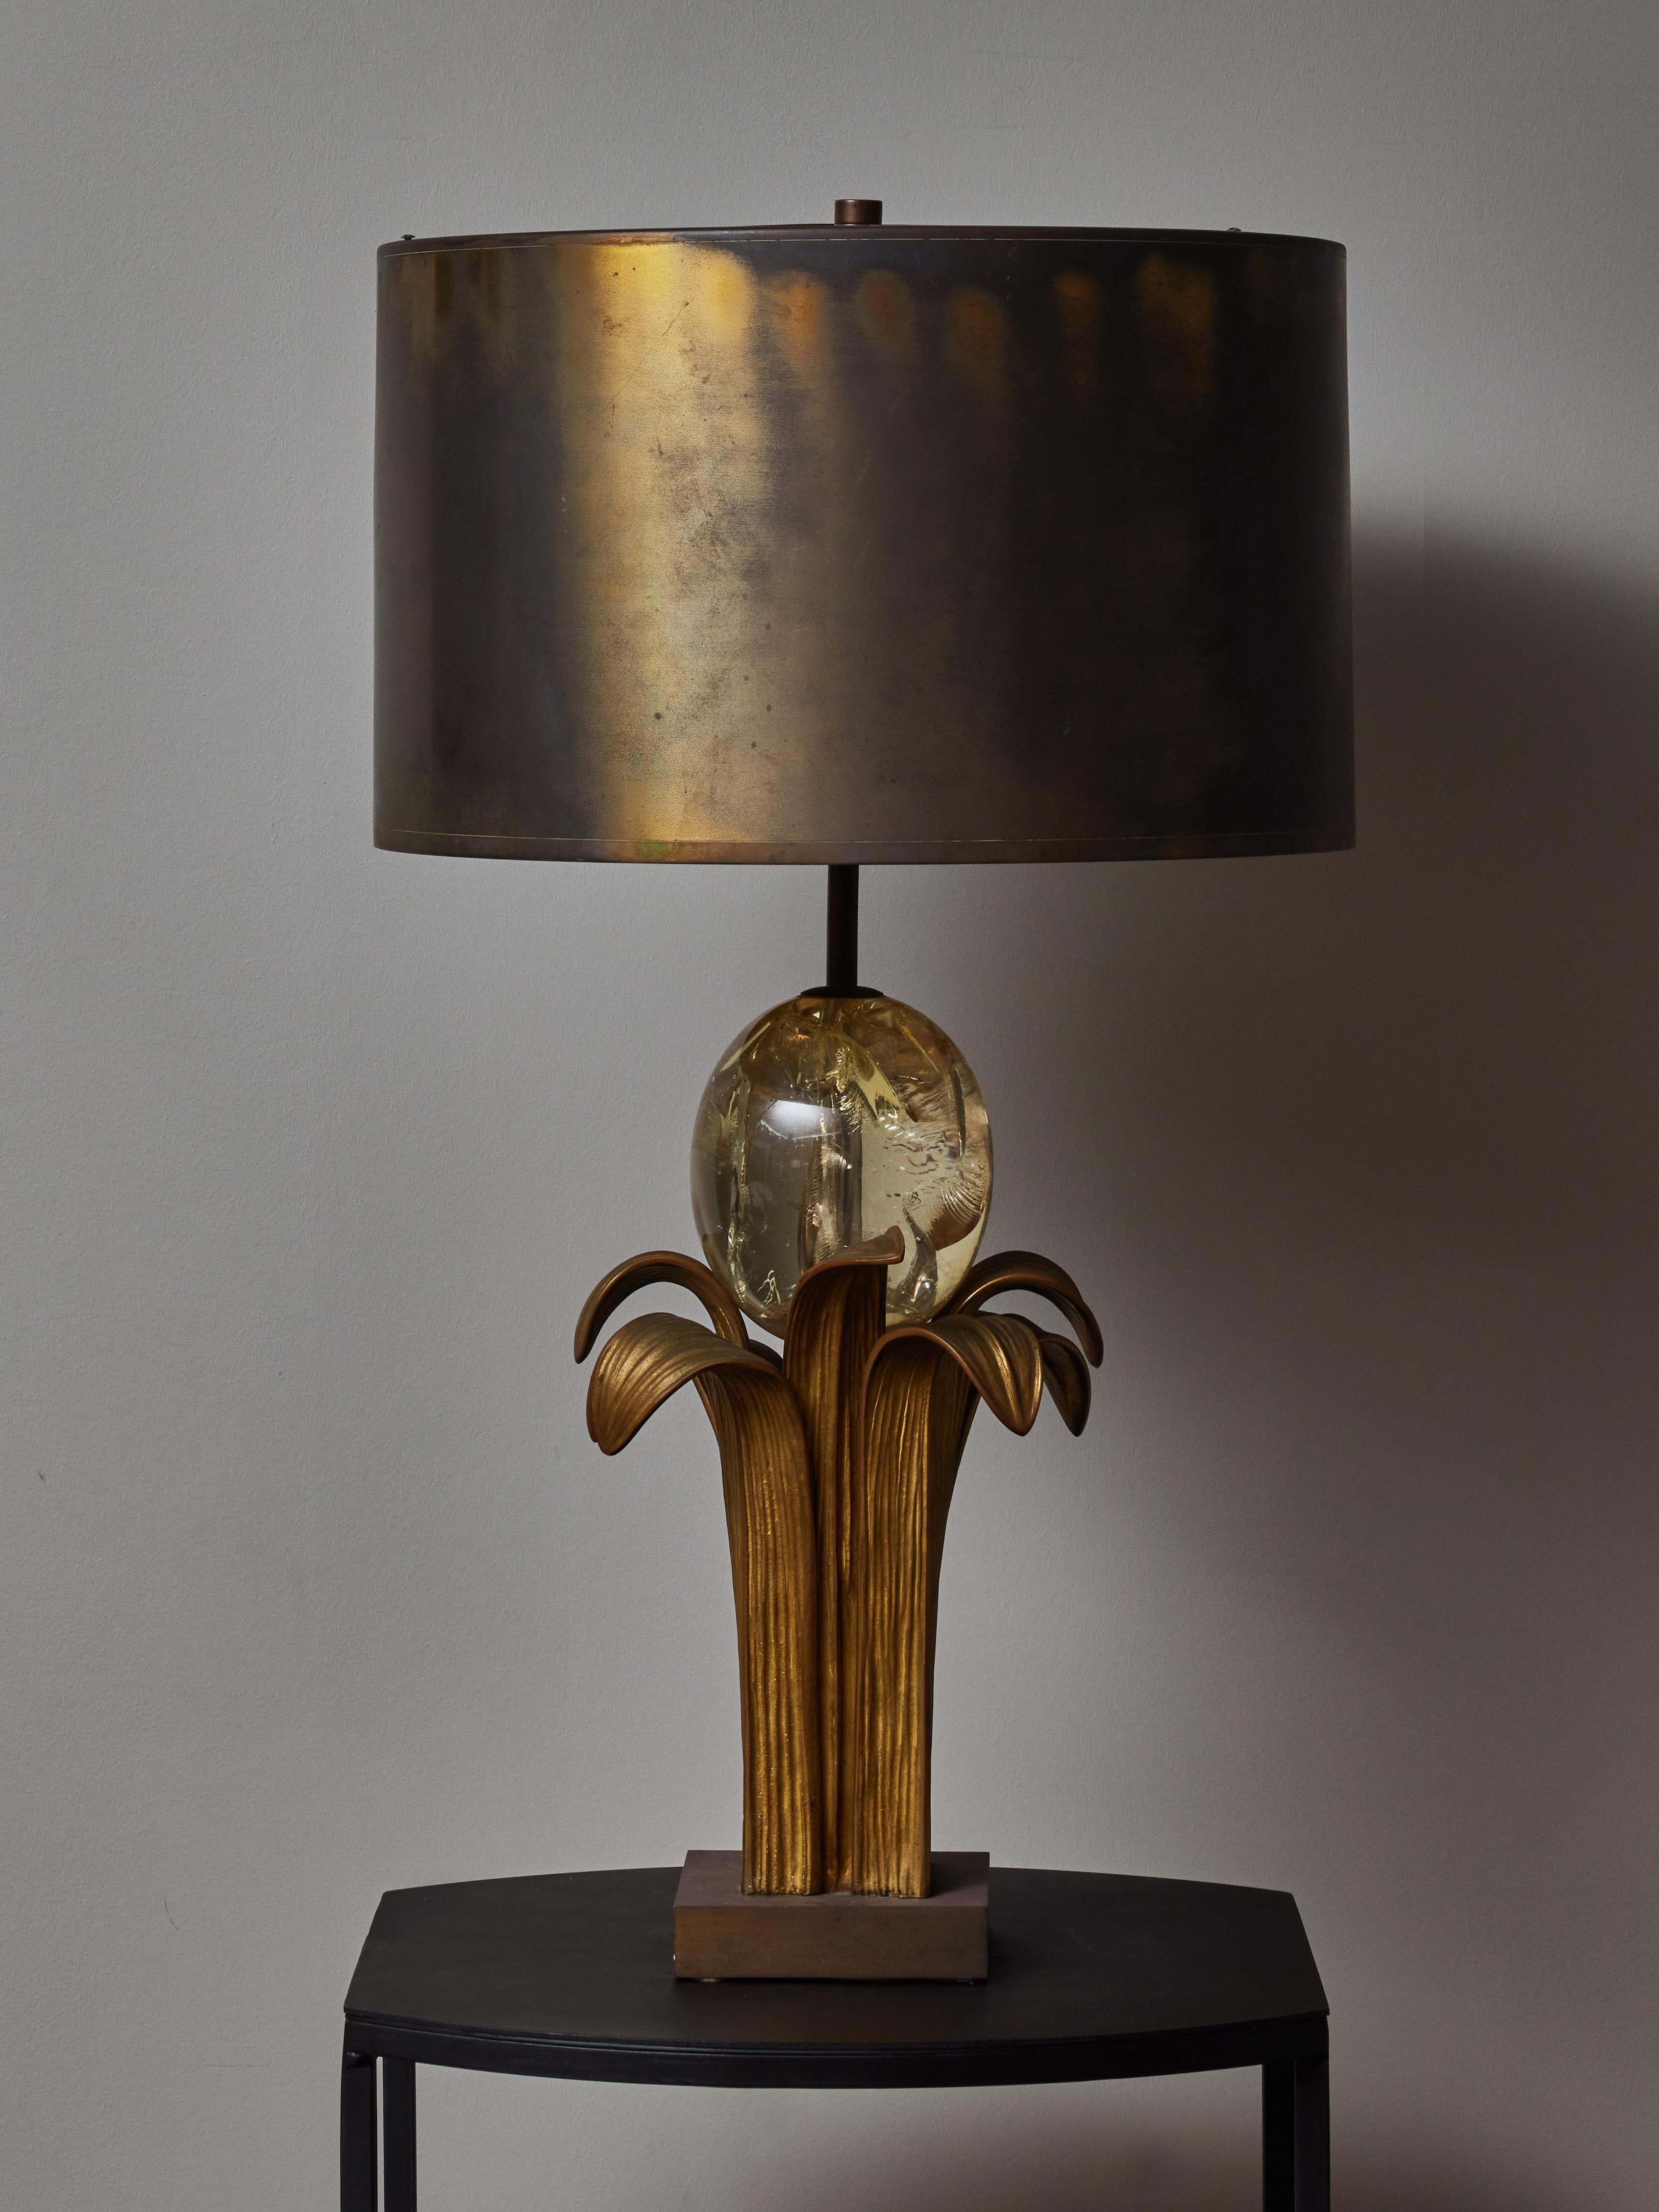 Original table lamp designed by Chrystiane Charles, heir of the renowned Maison Charles light makers. It is made of bronze leaves supporting a resin fractal sphere imitating an ostrich egg. Original brass shade provided, signature and stamp at the